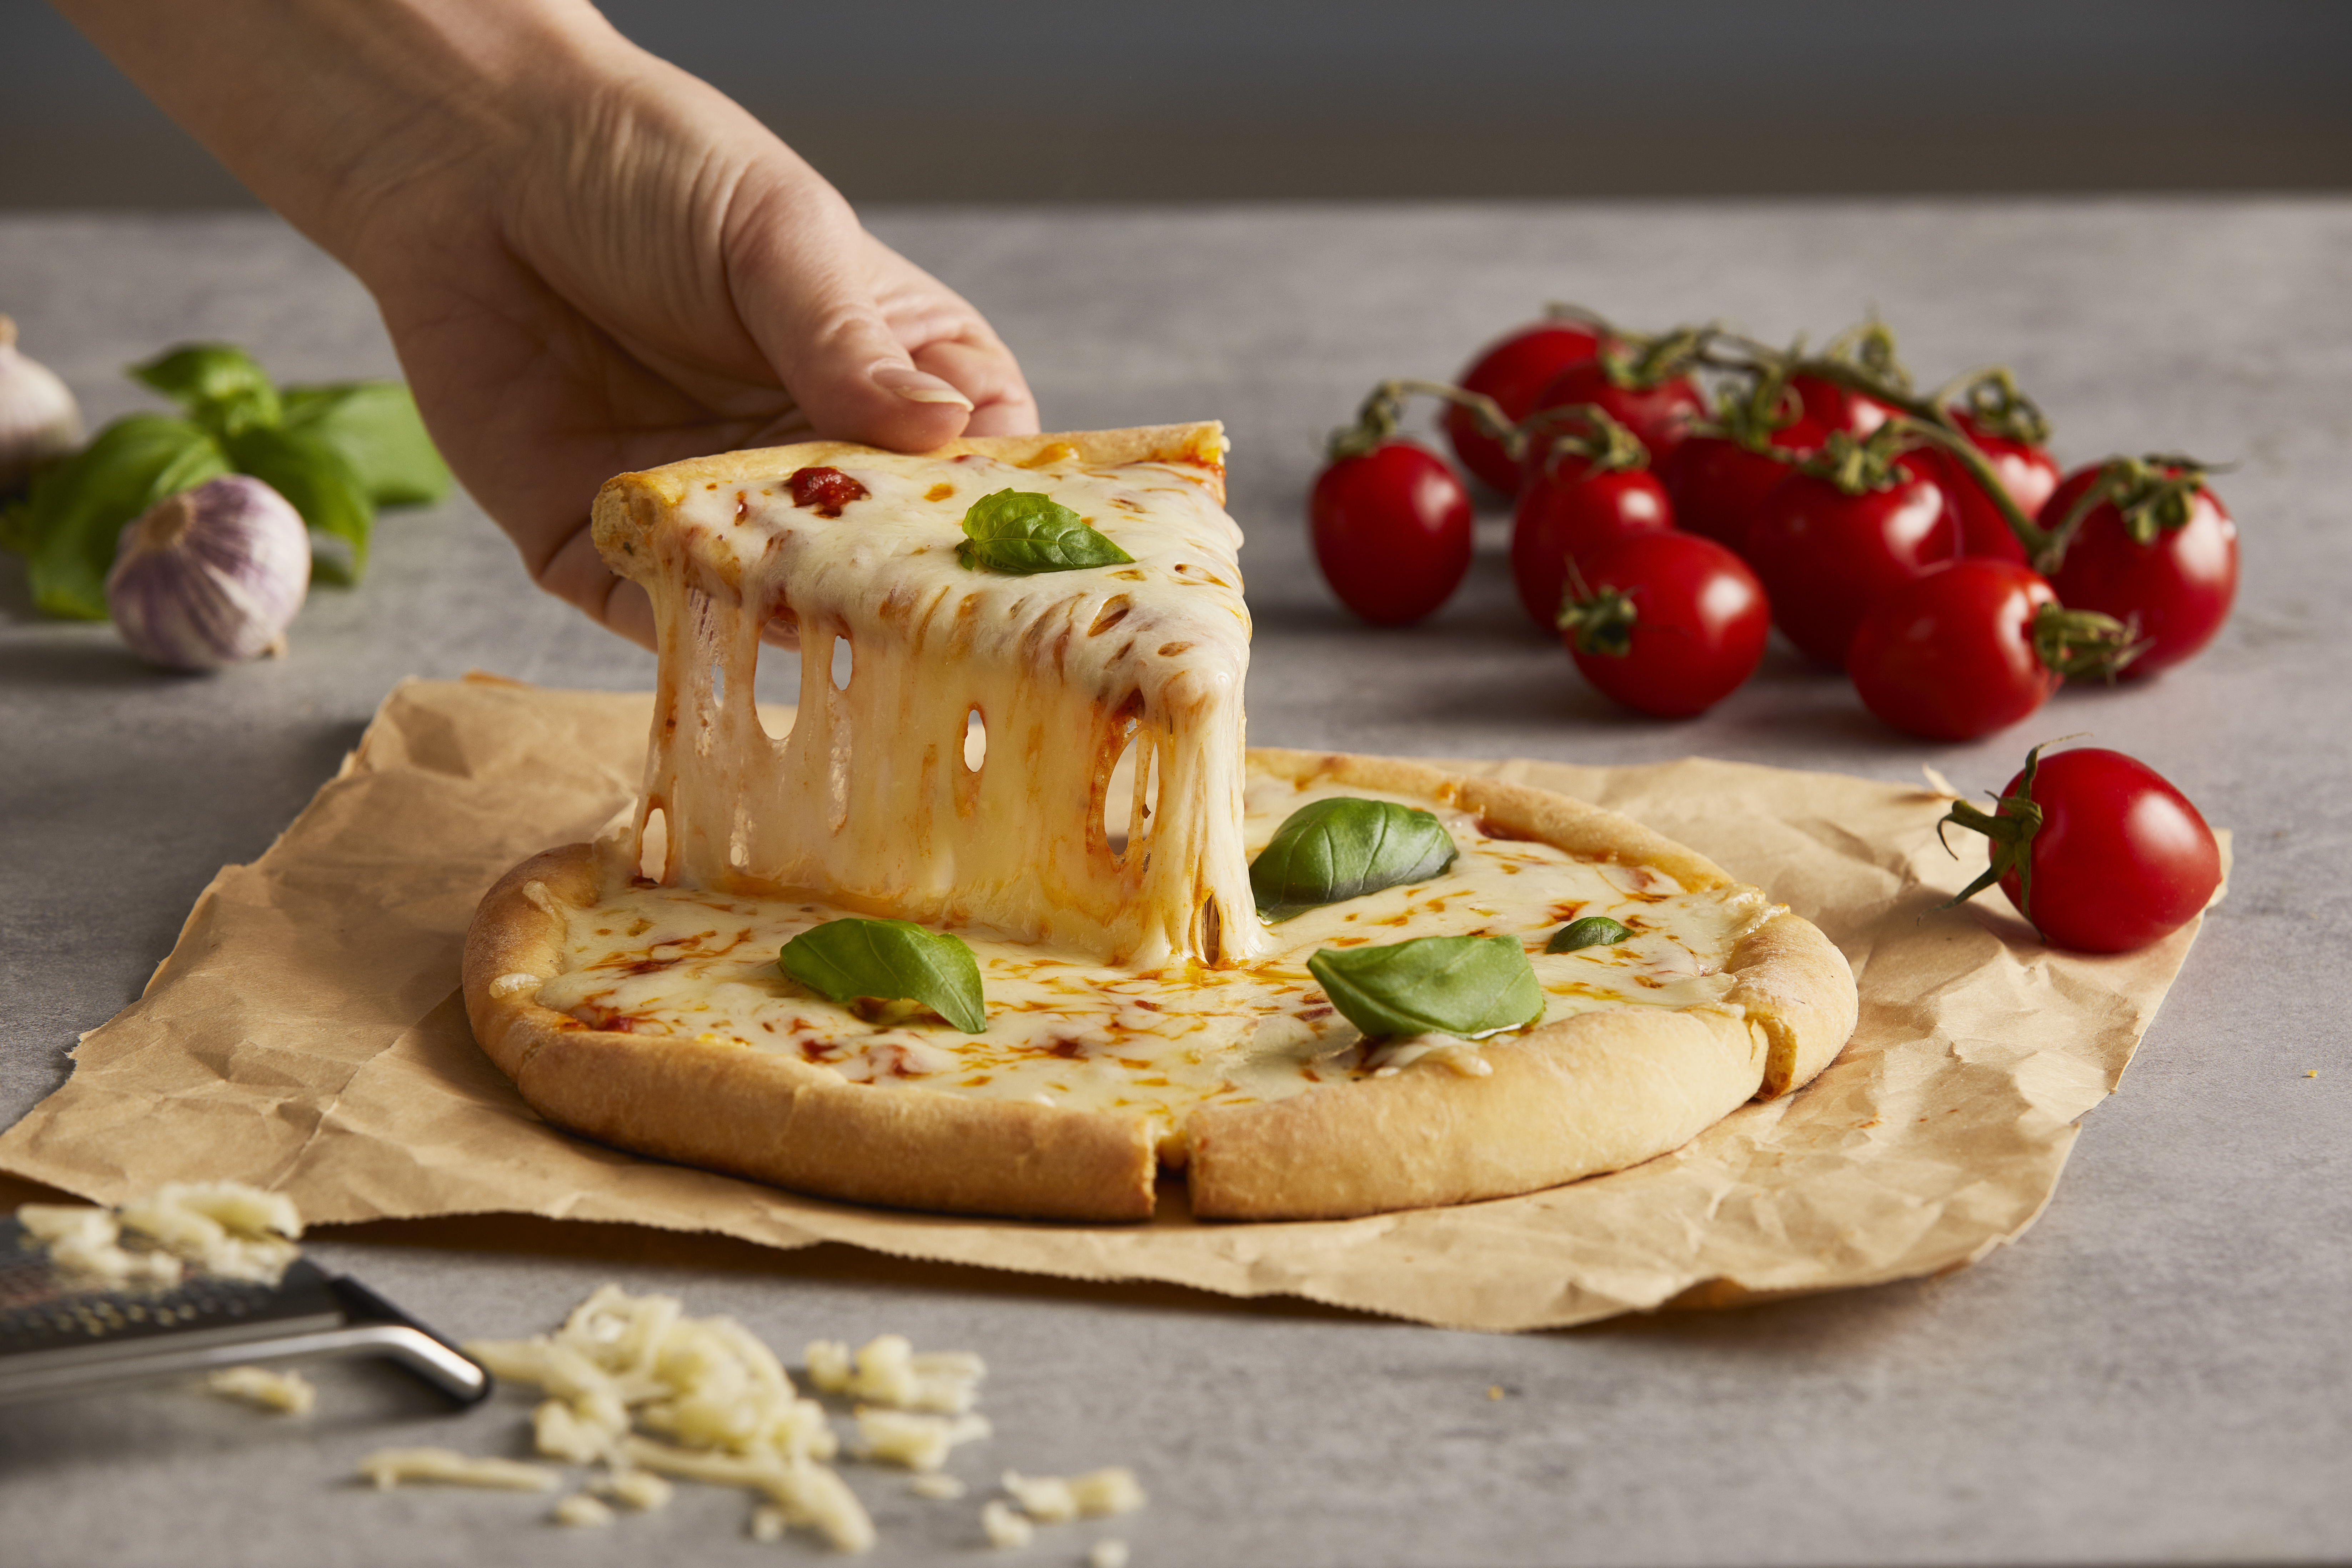 CheeseMaker solutions: Designed to improve functionalities